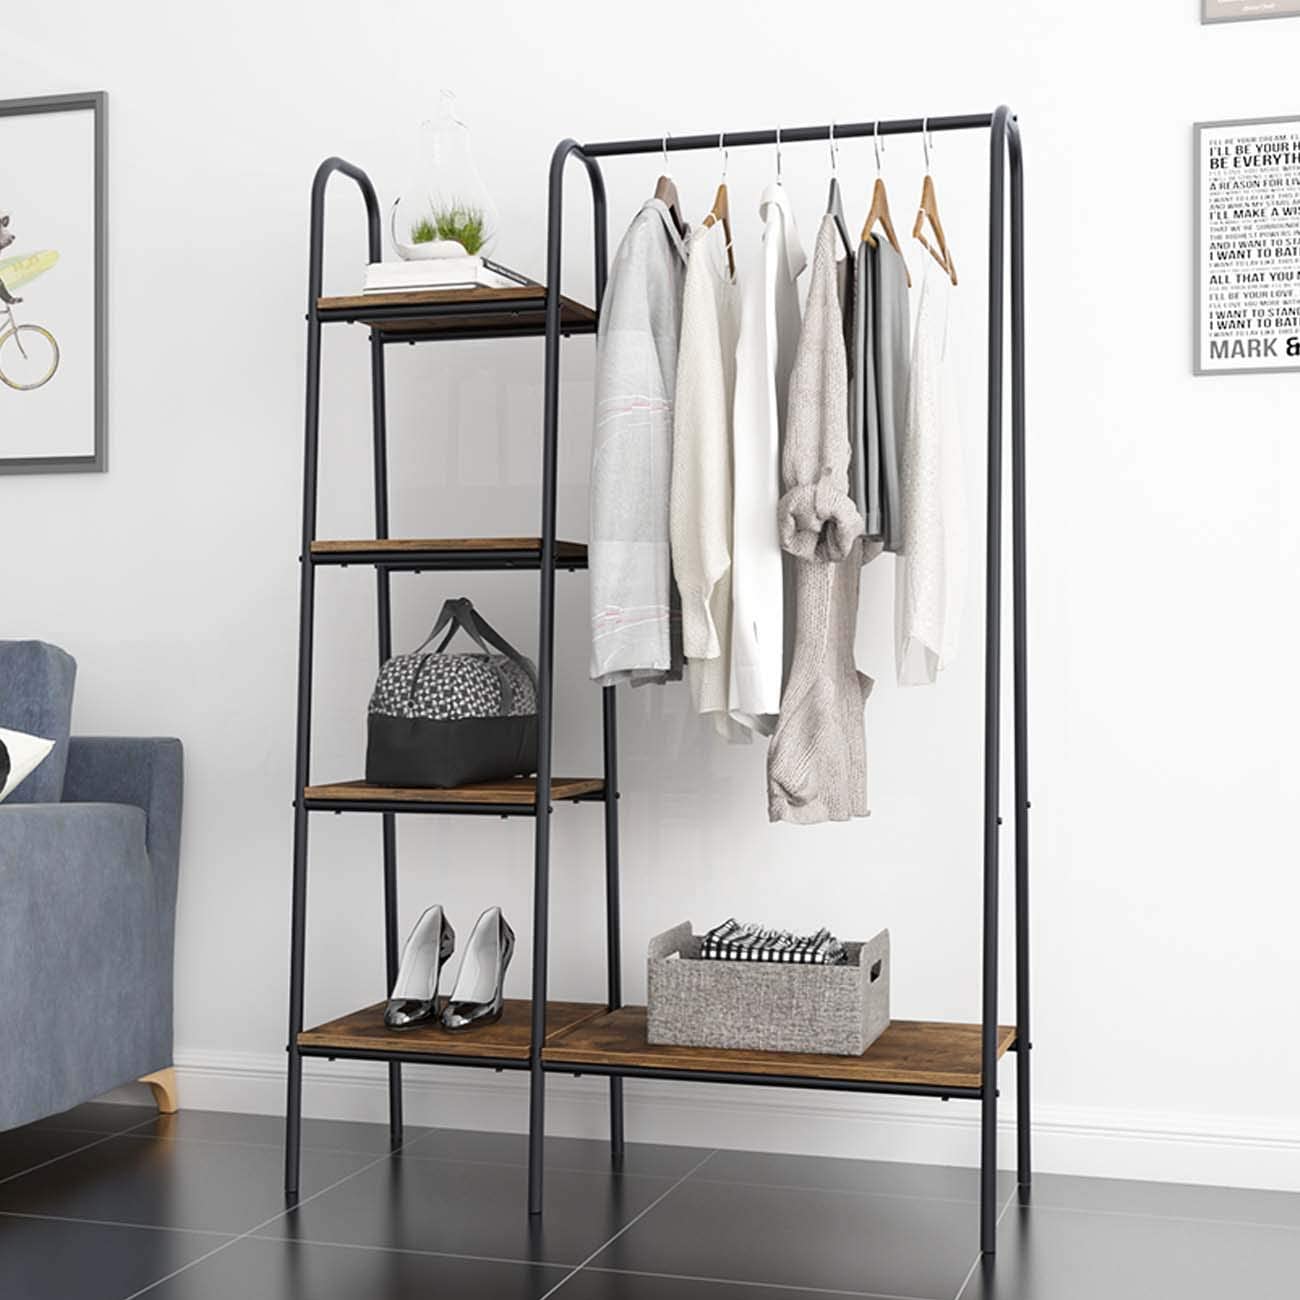 Metal Garment Rack Home Storage Rack Hanging Clothing Bar with Multi Wooden Shelves 60" x 40" - image 3 of 12